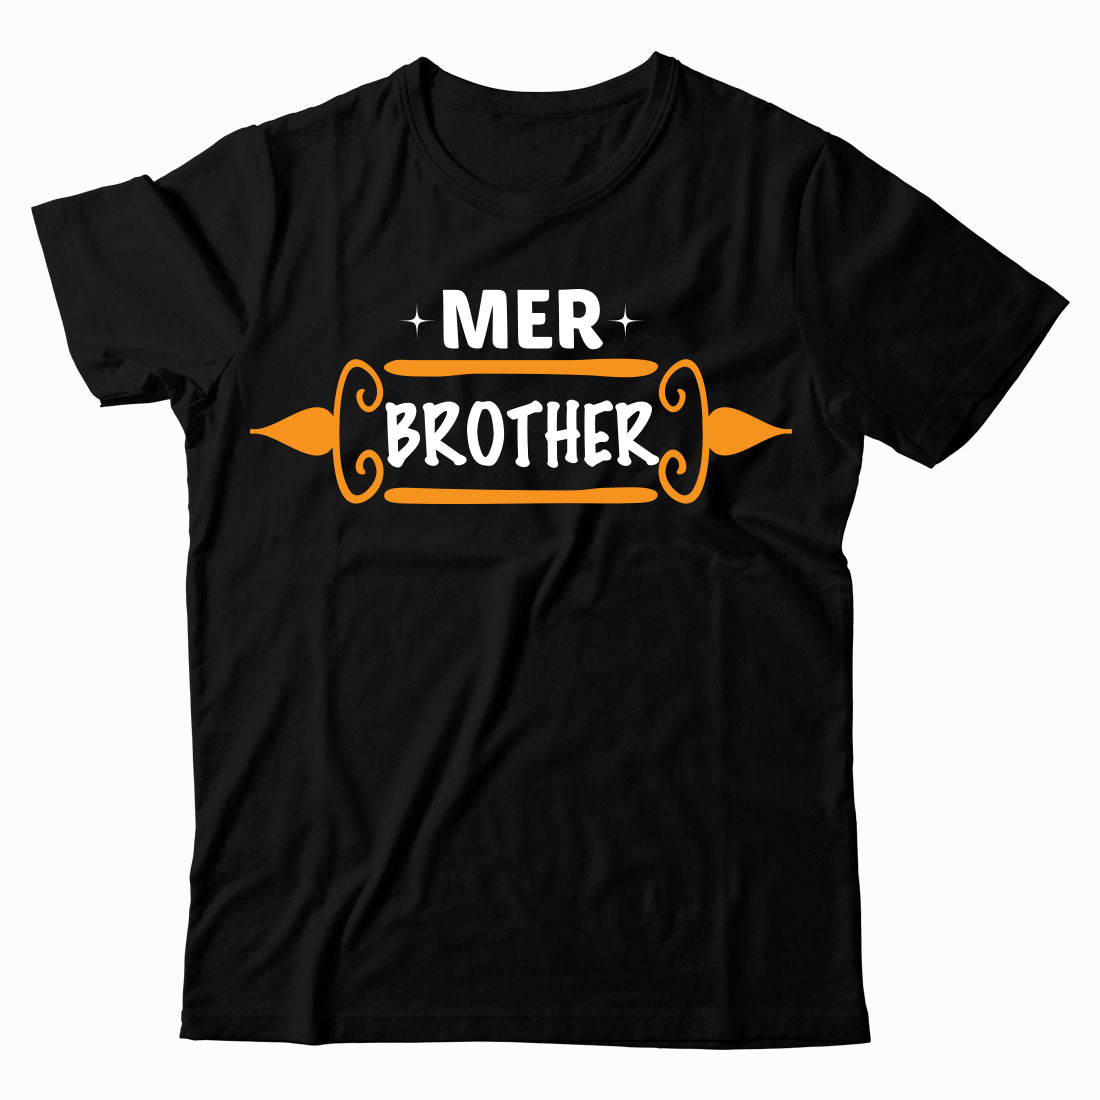 Black t - shirt with the words'mer brother'printed on it.